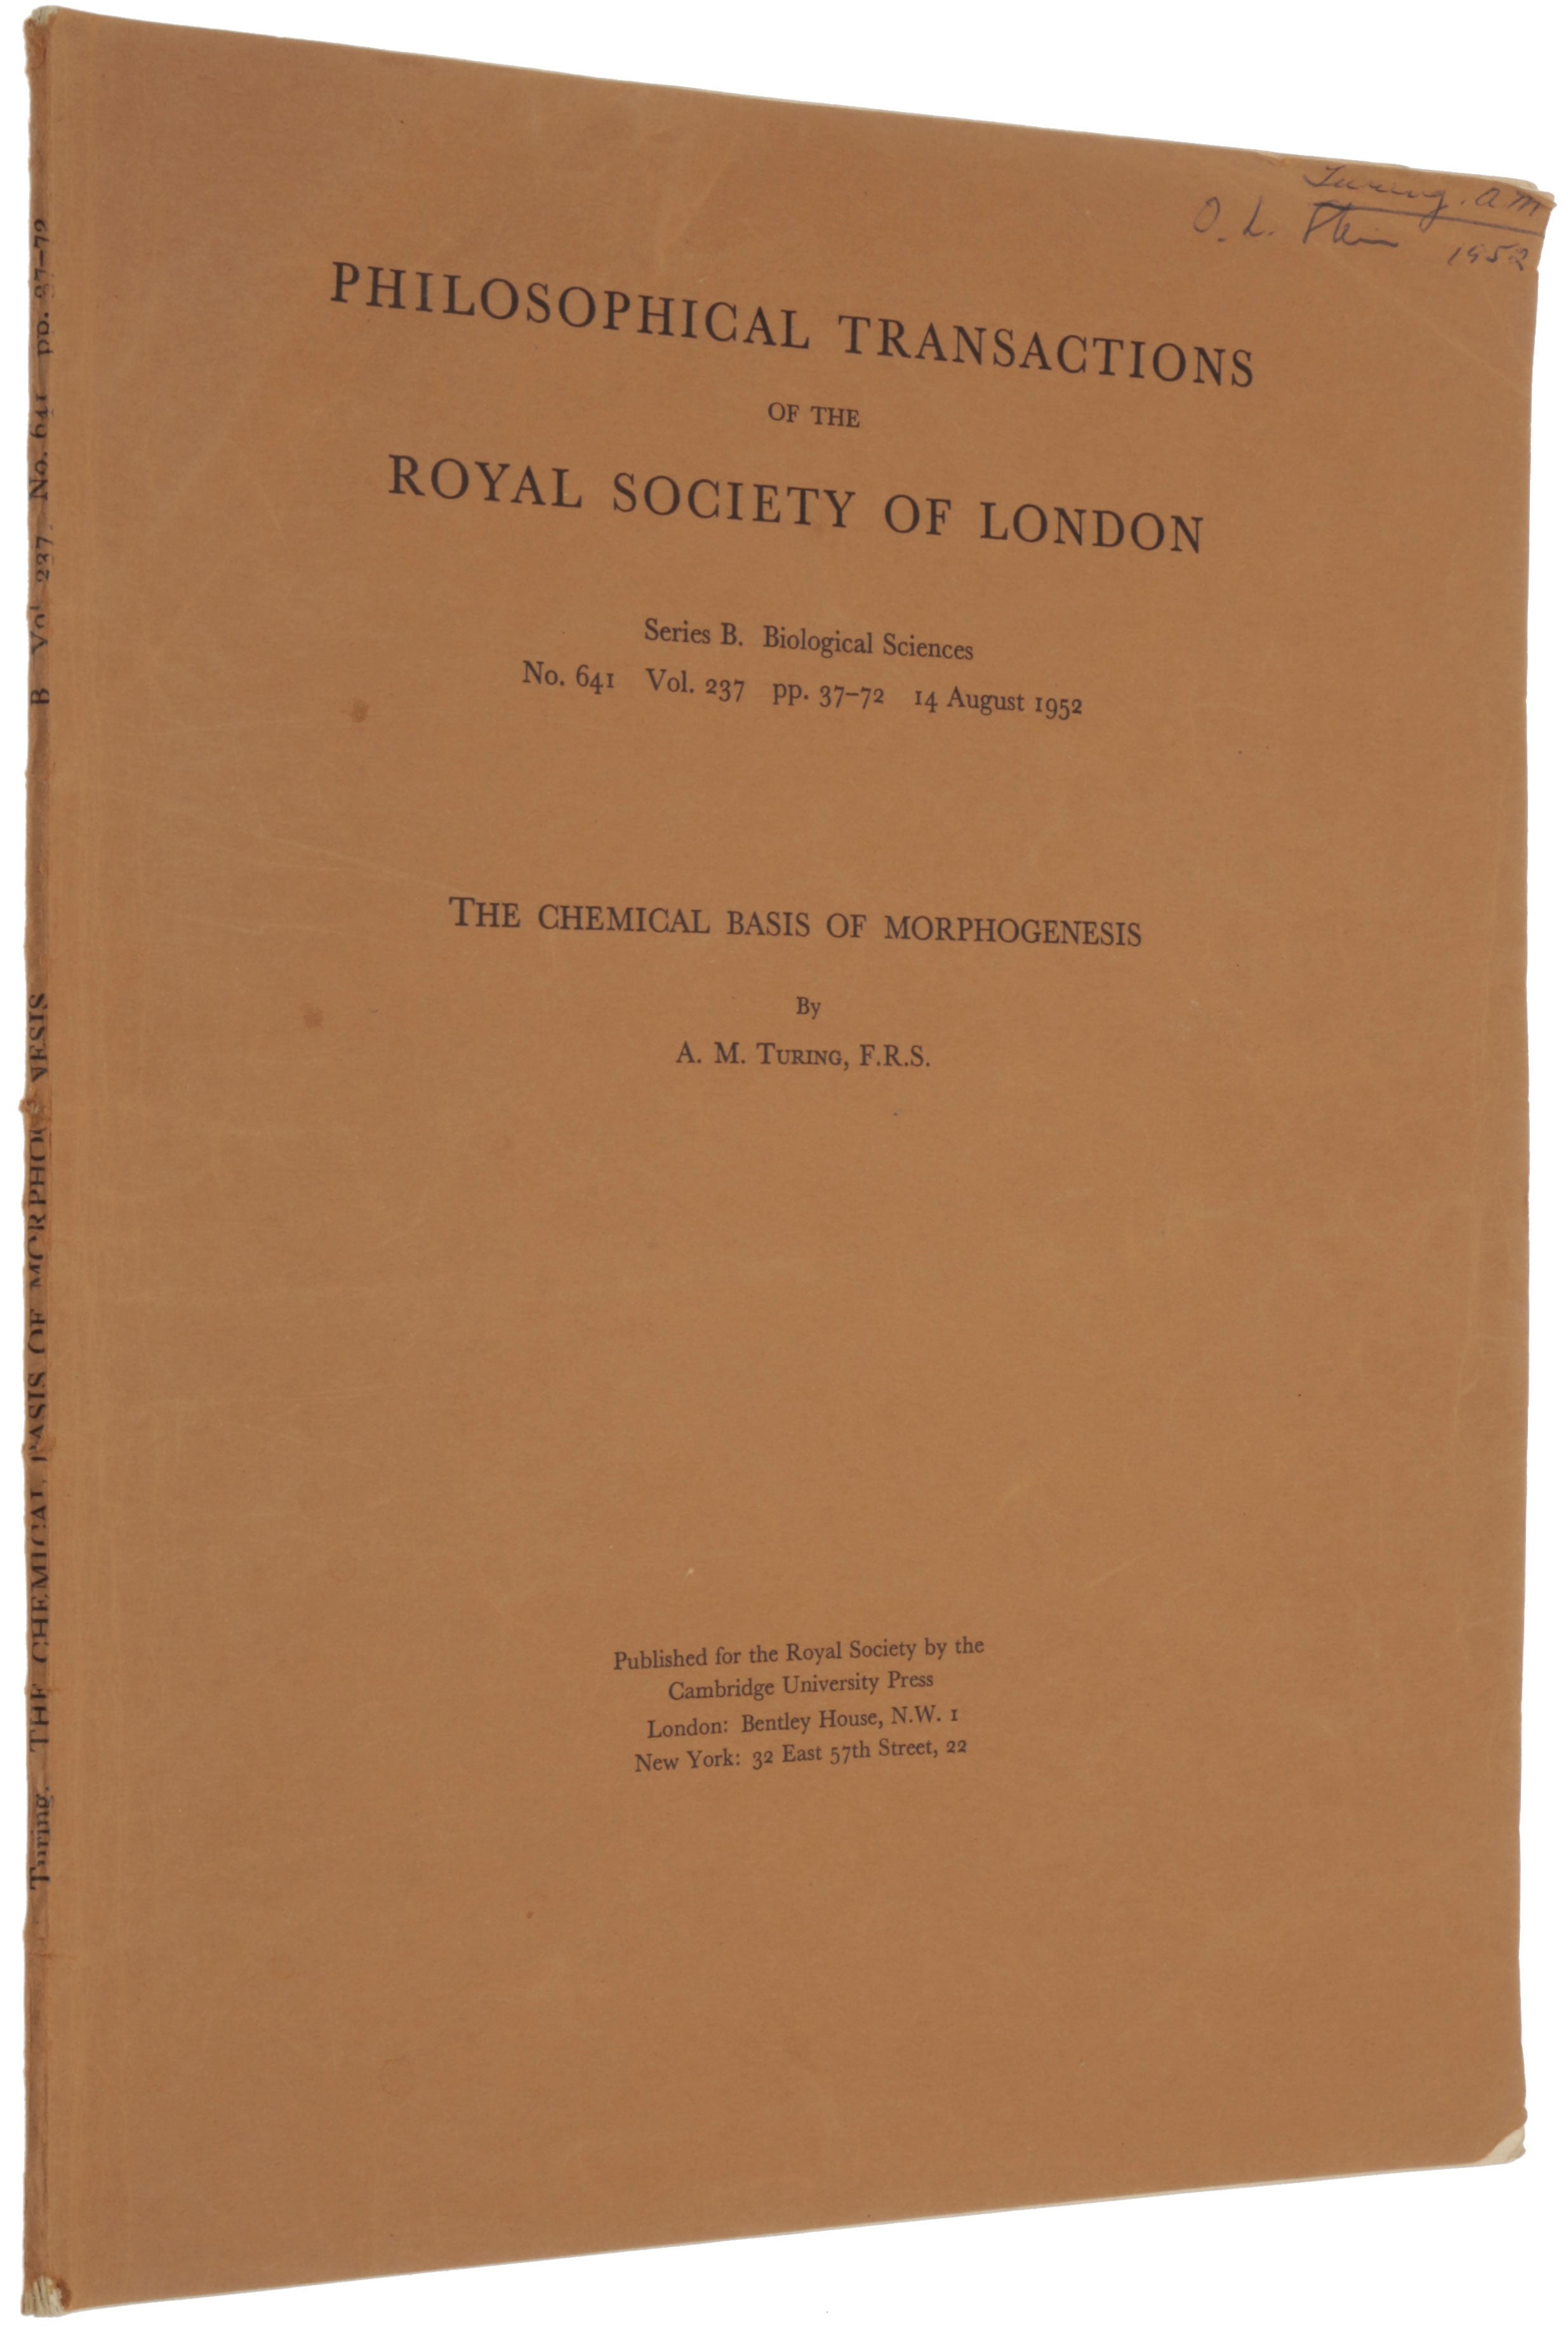 Item #5612 The chemical basis of morphogenesis. Offprint from: Philosophical Transactions of the Royal Society of London, Series B, Vol. 237, No. 641, 14 August, 1952. Alan Mathison TURING.